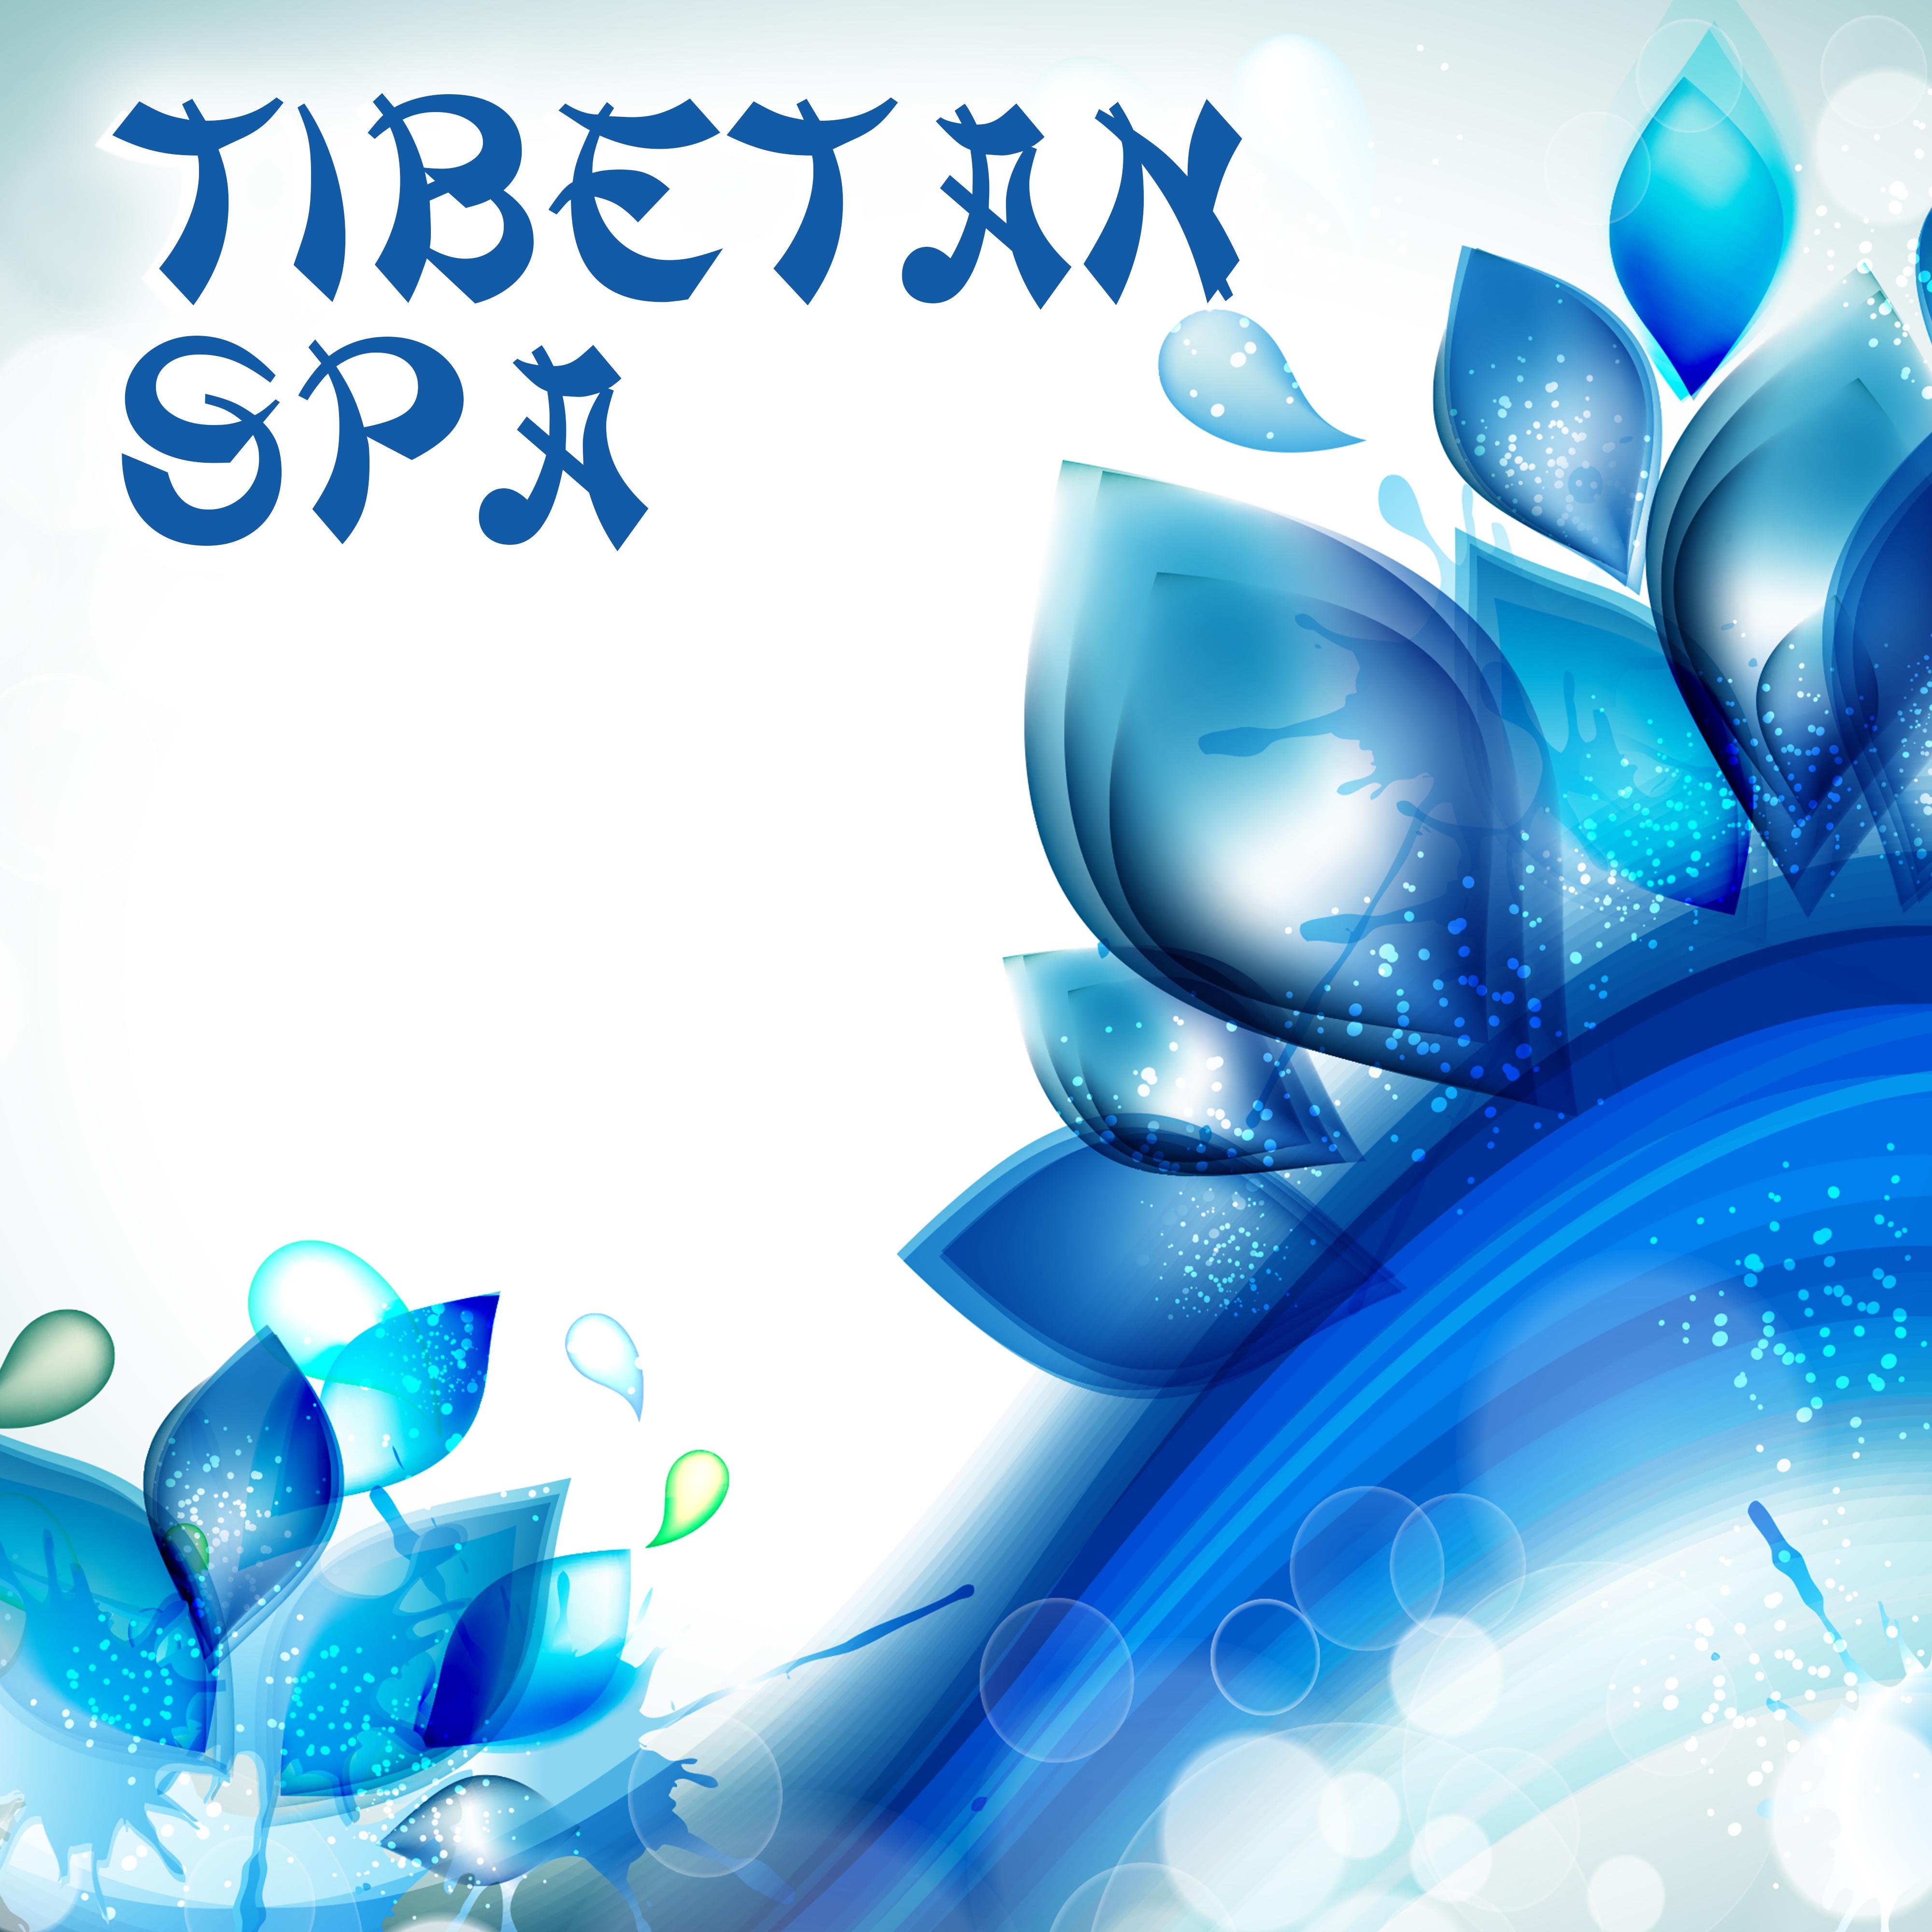 Tibetan Spa – Massage Therapy, Relaxation Wellness, Pure Mind, Oriental Sounds, Stress Relief, Zen Spa Music, Relaxing Waves, Nature Sounds